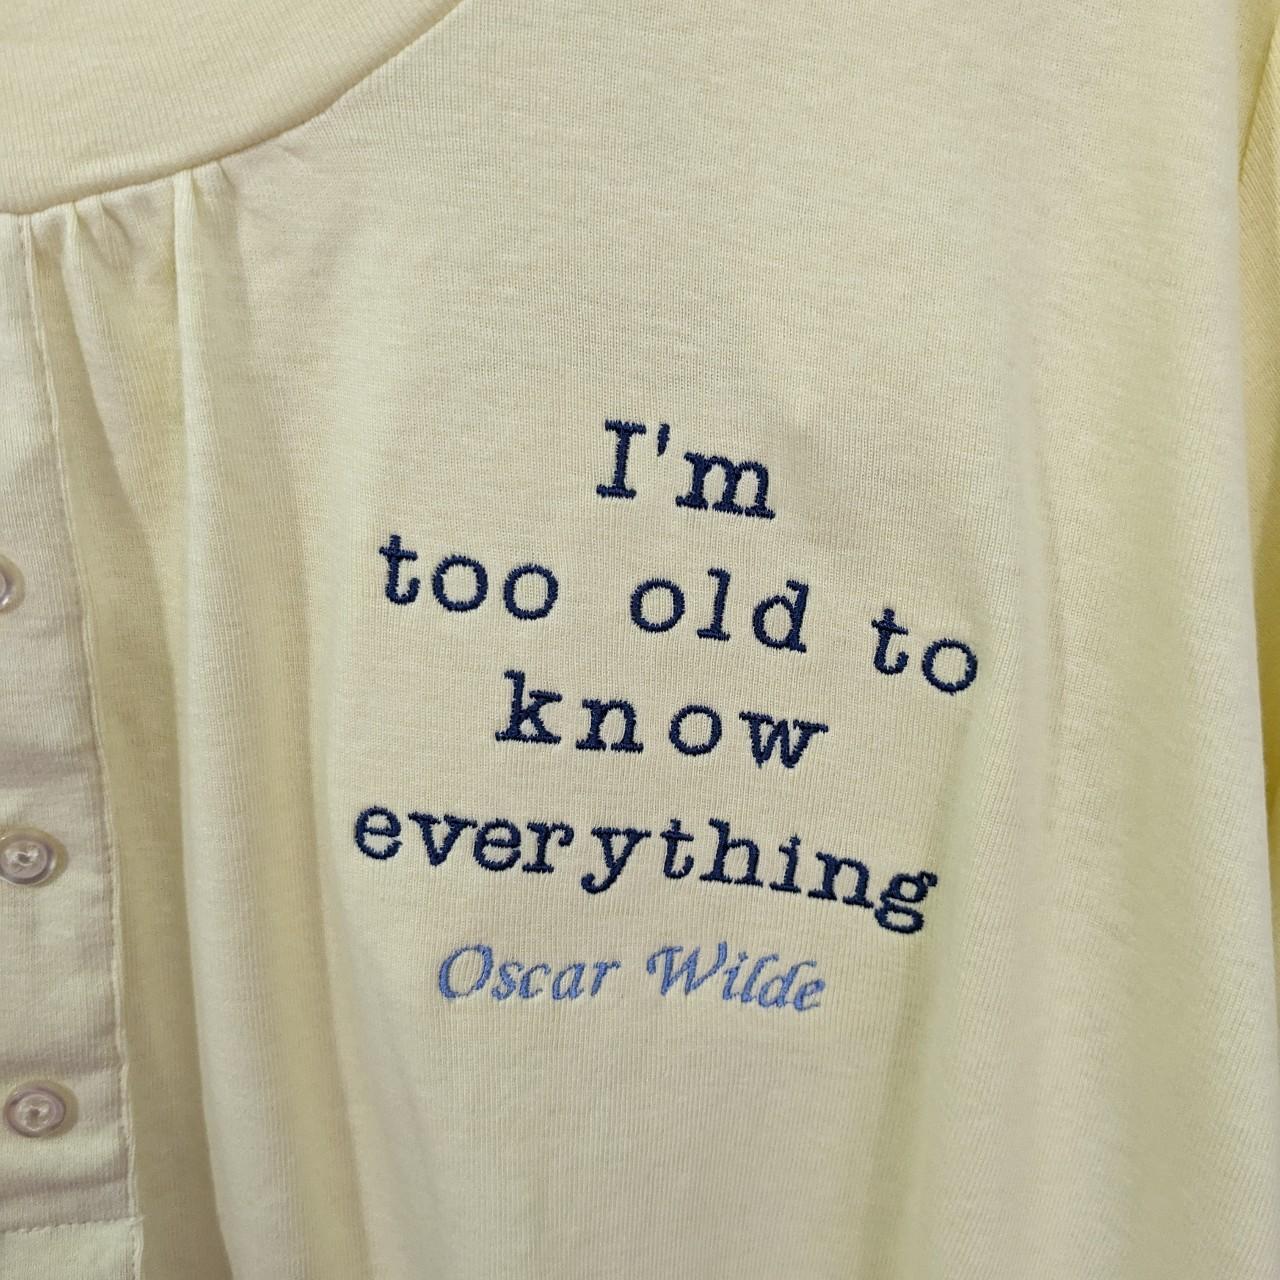 Size 20/22 Yellow Reworked T-Shirt with Embroidered Oscar Wilde Quote